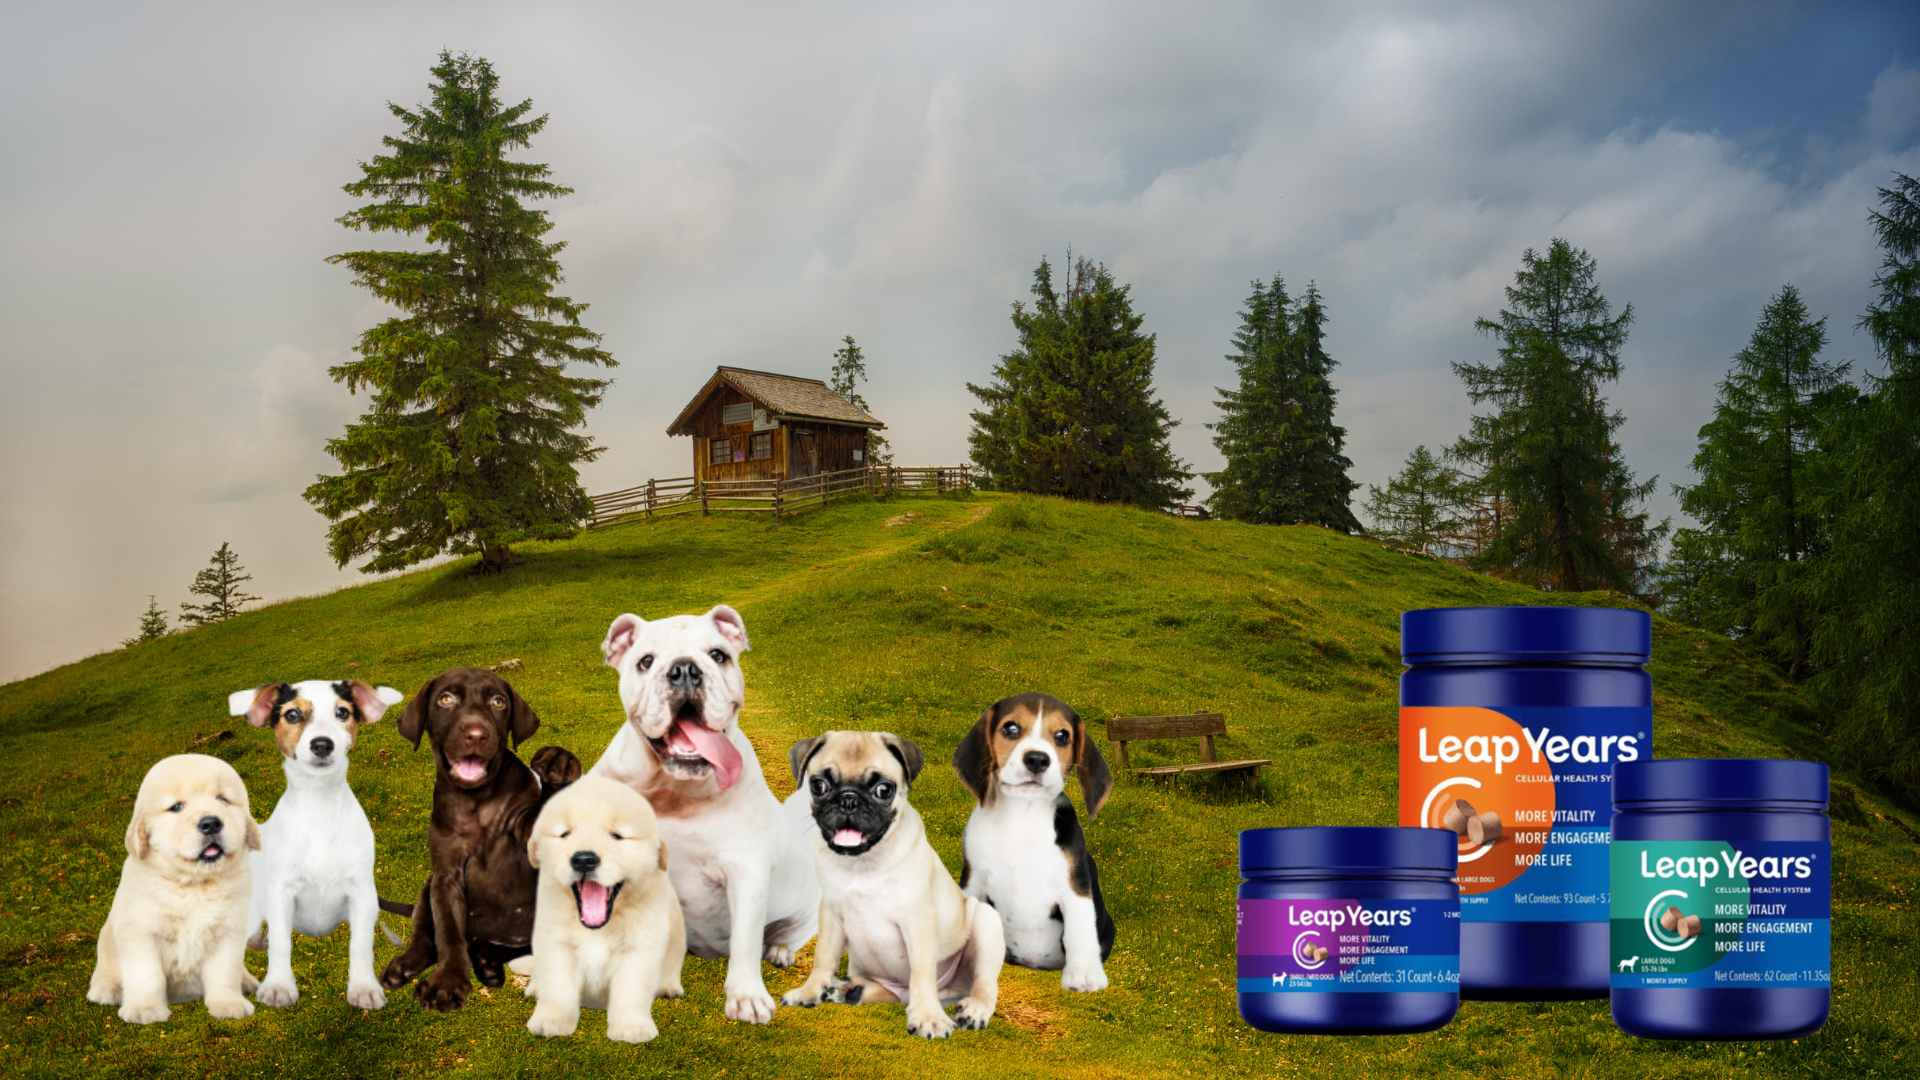 Boost Your Dog’s Well-Being with Leap Years Supplements